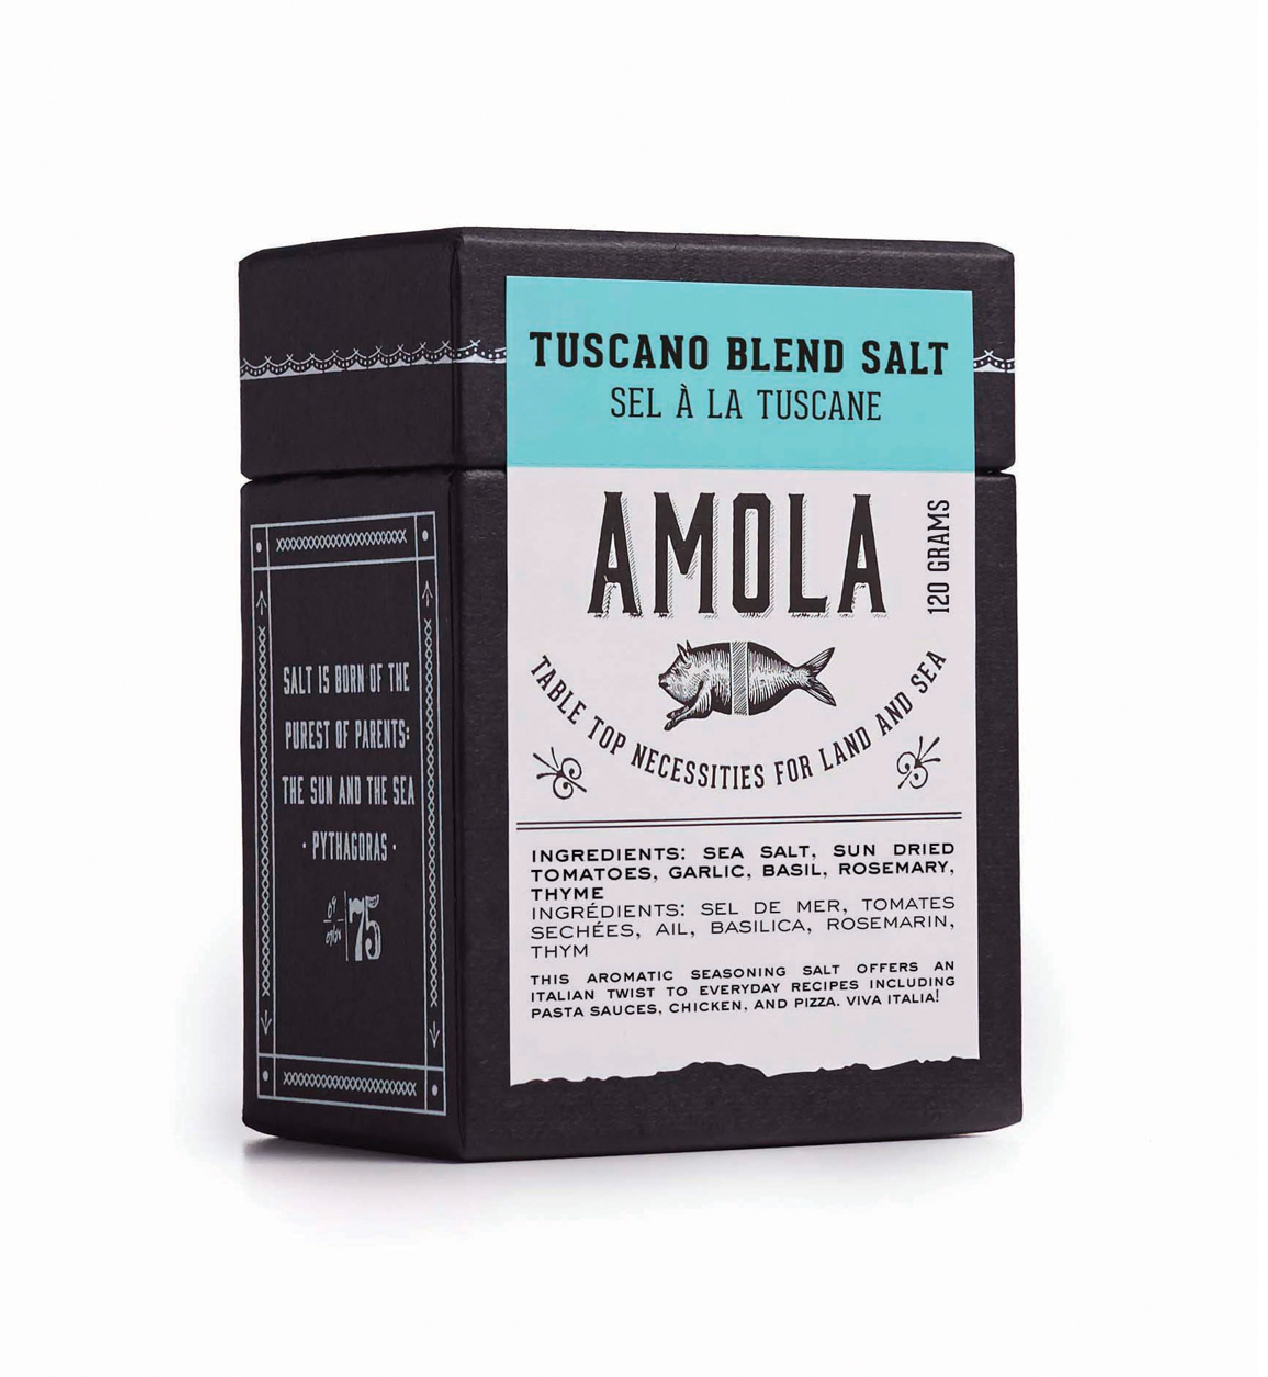 Branding and packaging design for Amola.